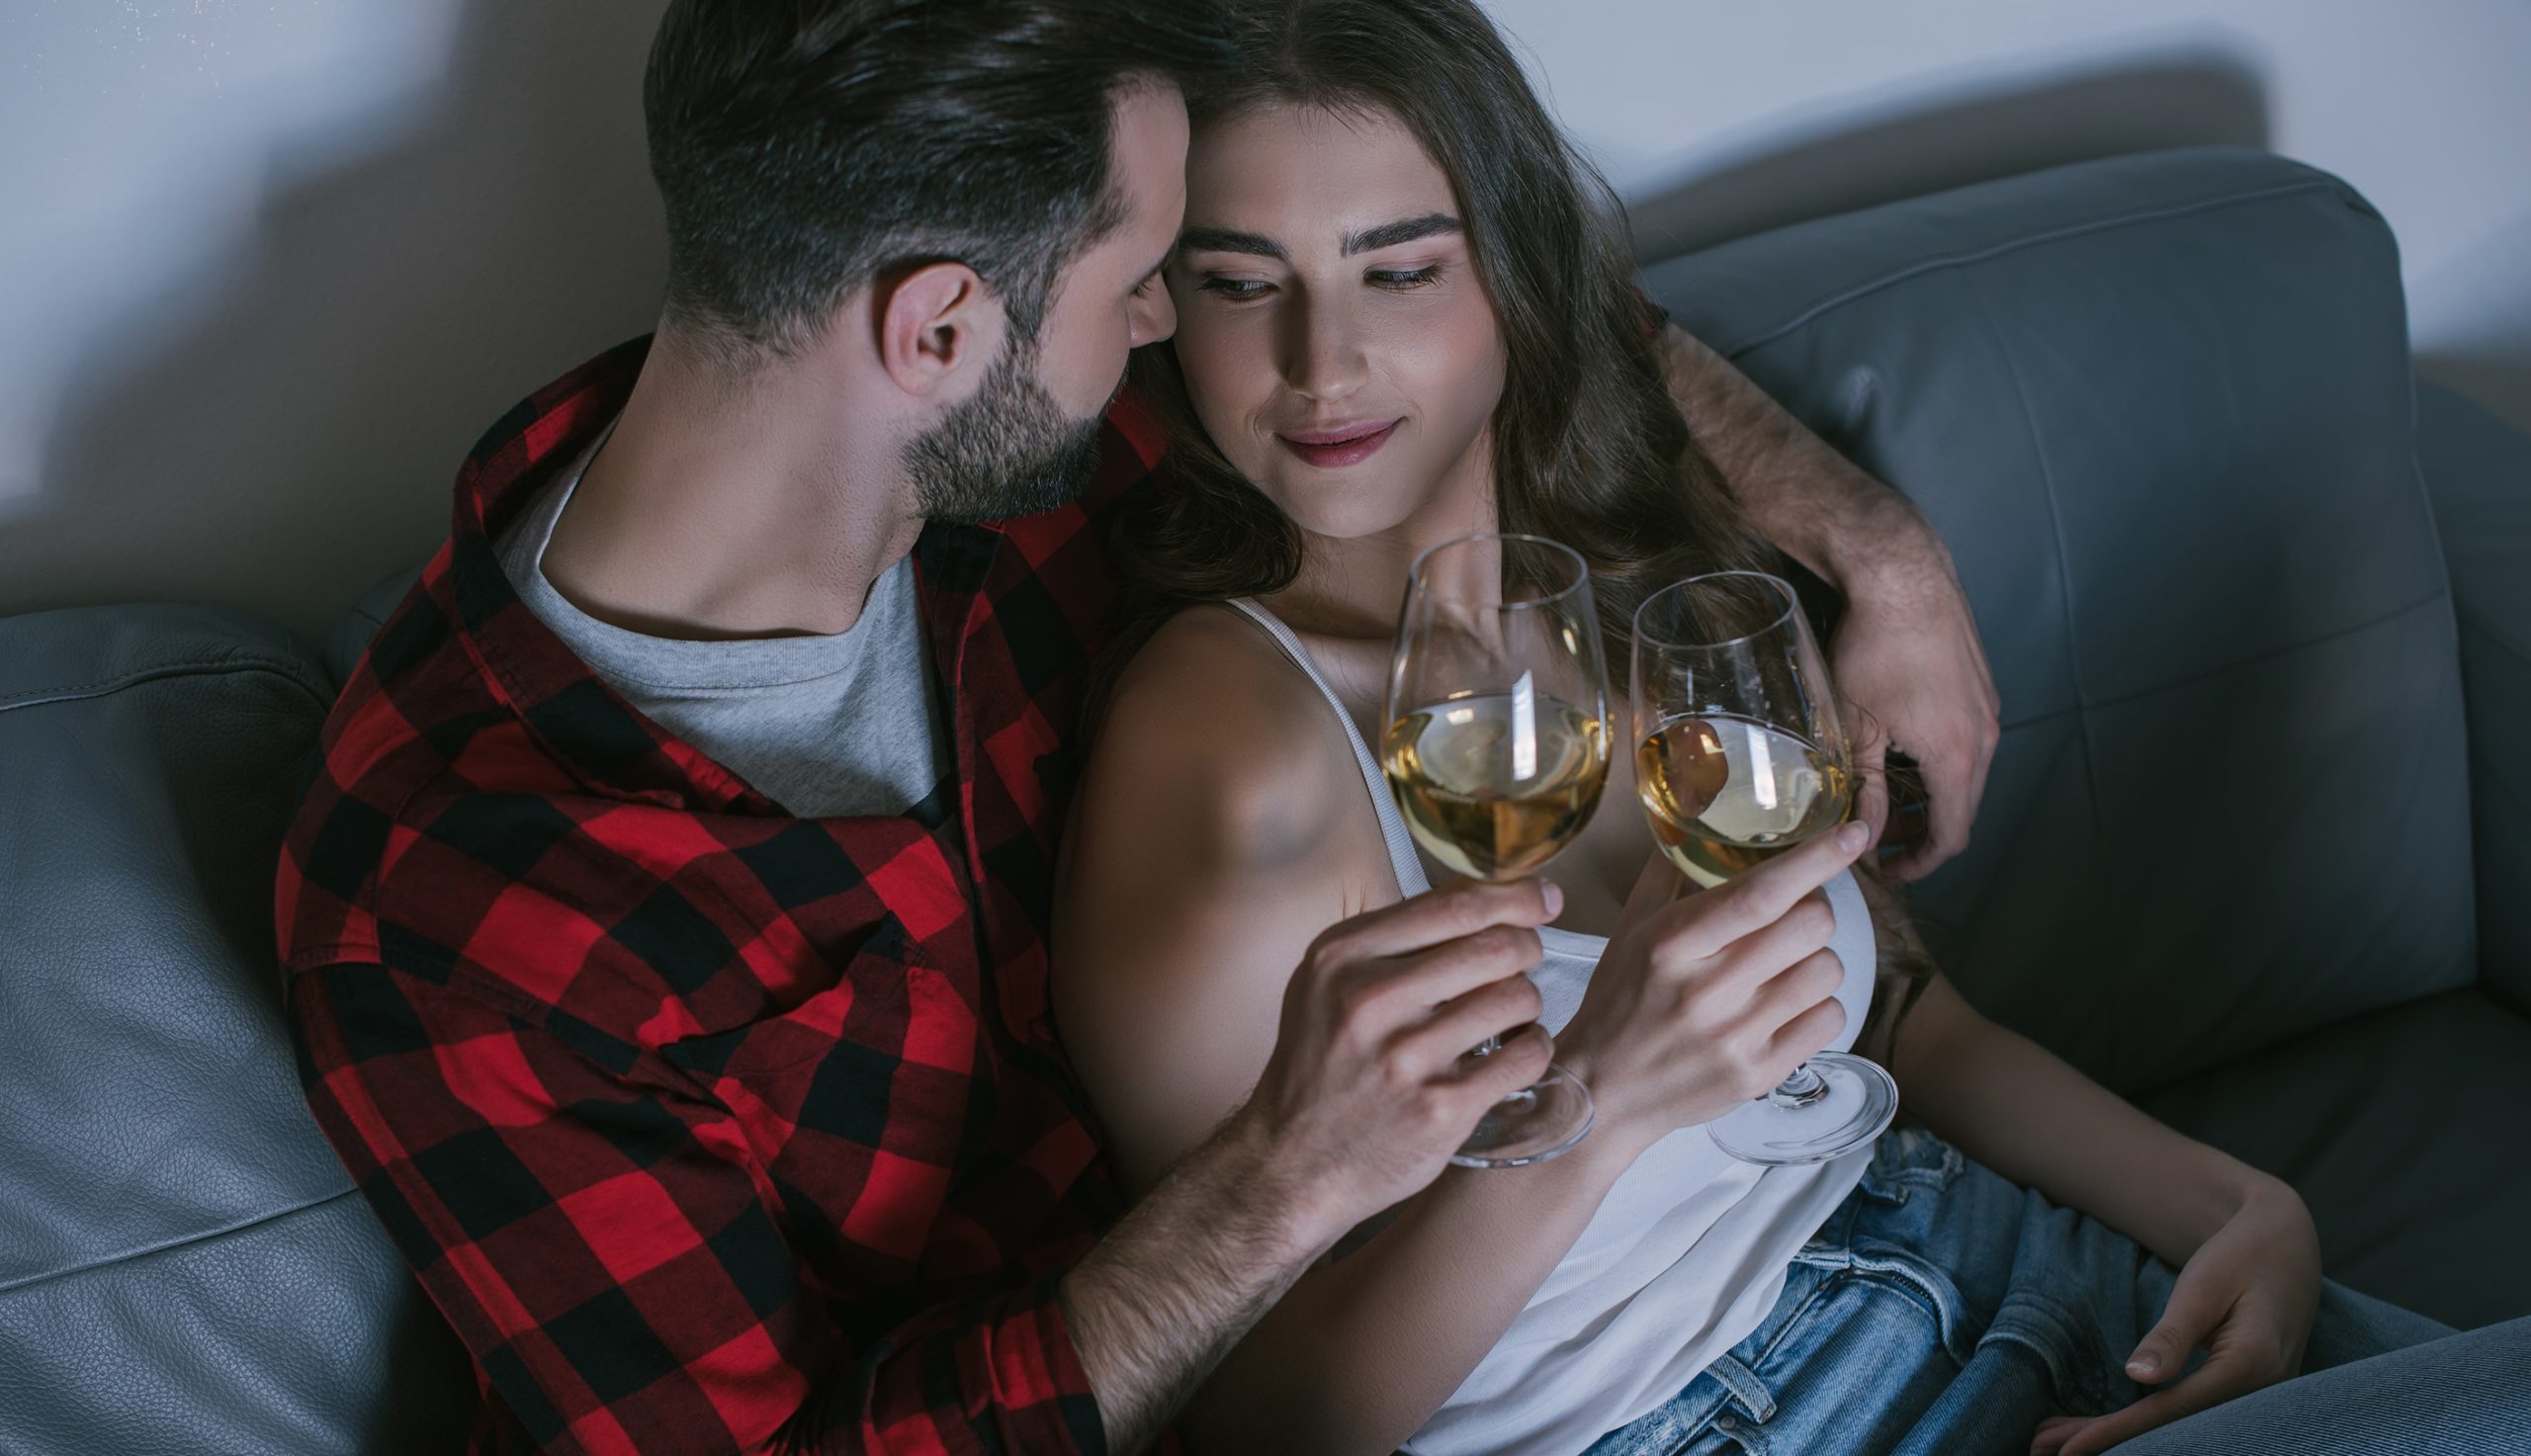 23 Ways to Get Someone to Have Sex With You, Be It a Stranger or Friend